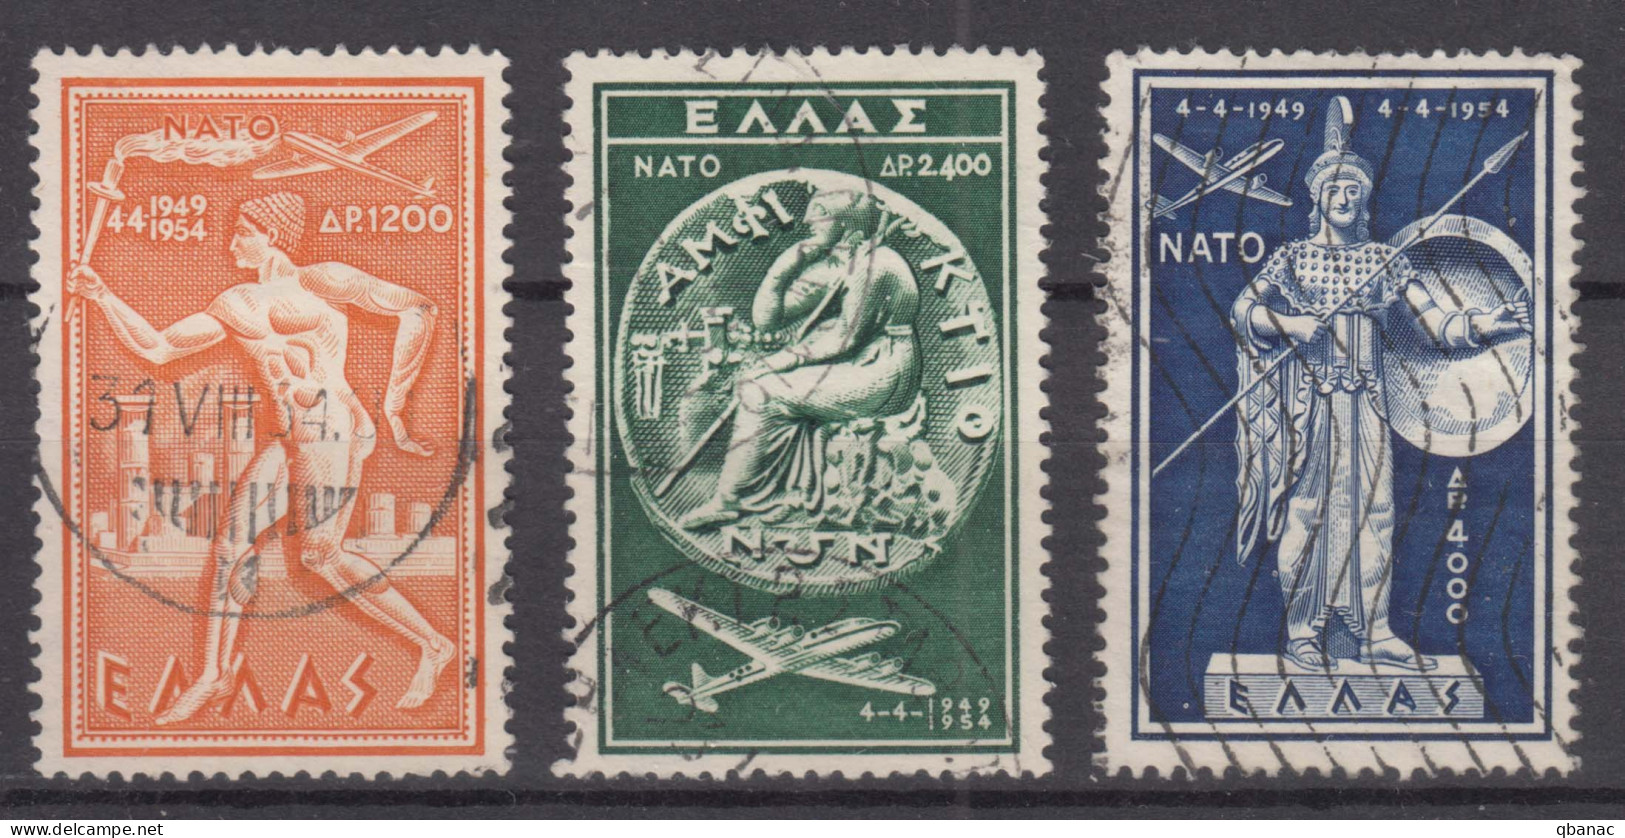 Greece 1954 NATO Airmail Mi#615-617 Used - Used Stamps